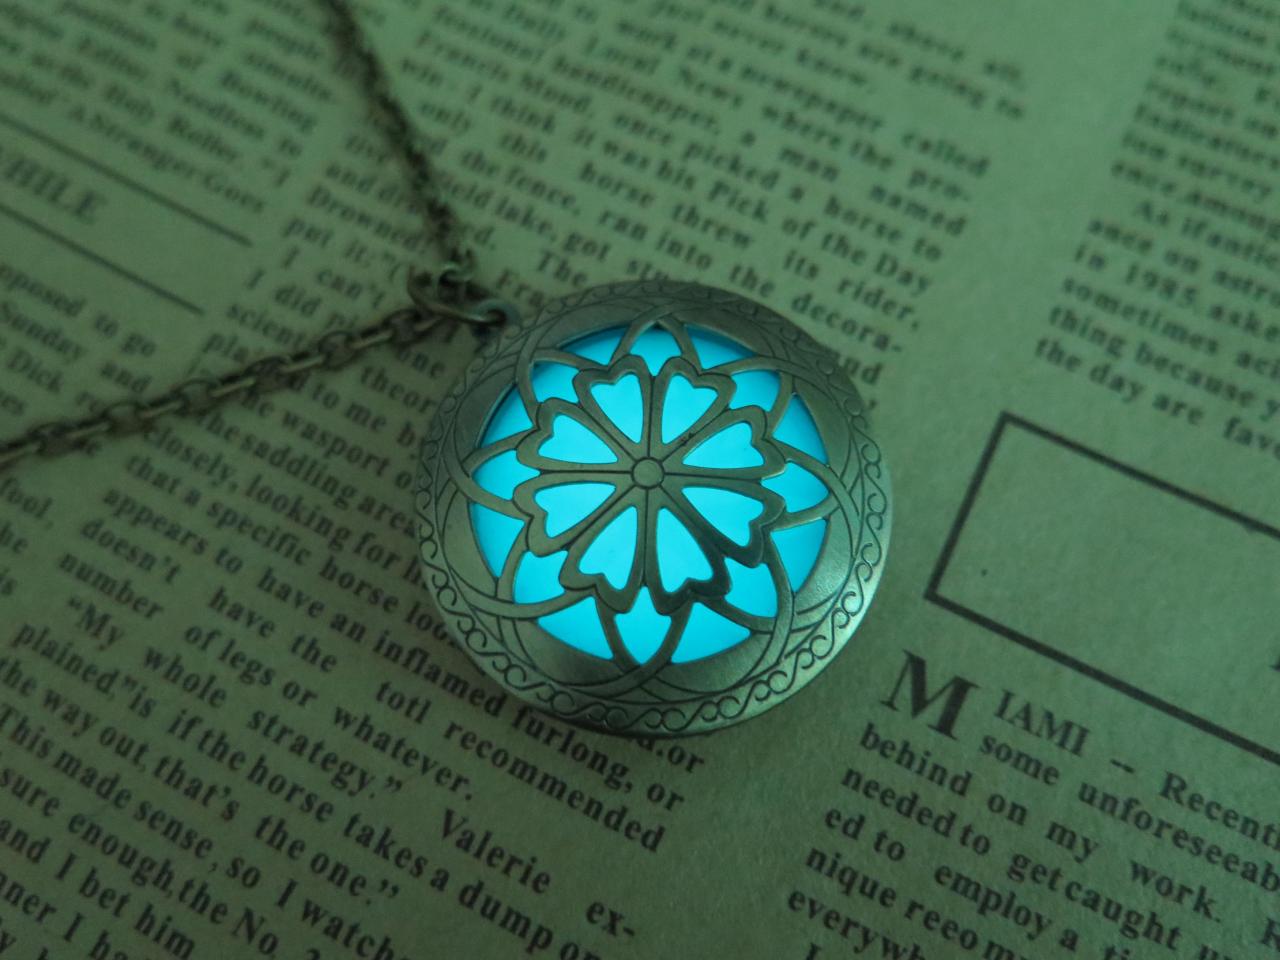 Free shipping Cyan Brass Plated Glow In The Dark Celtic Galaxy Locket Necklace